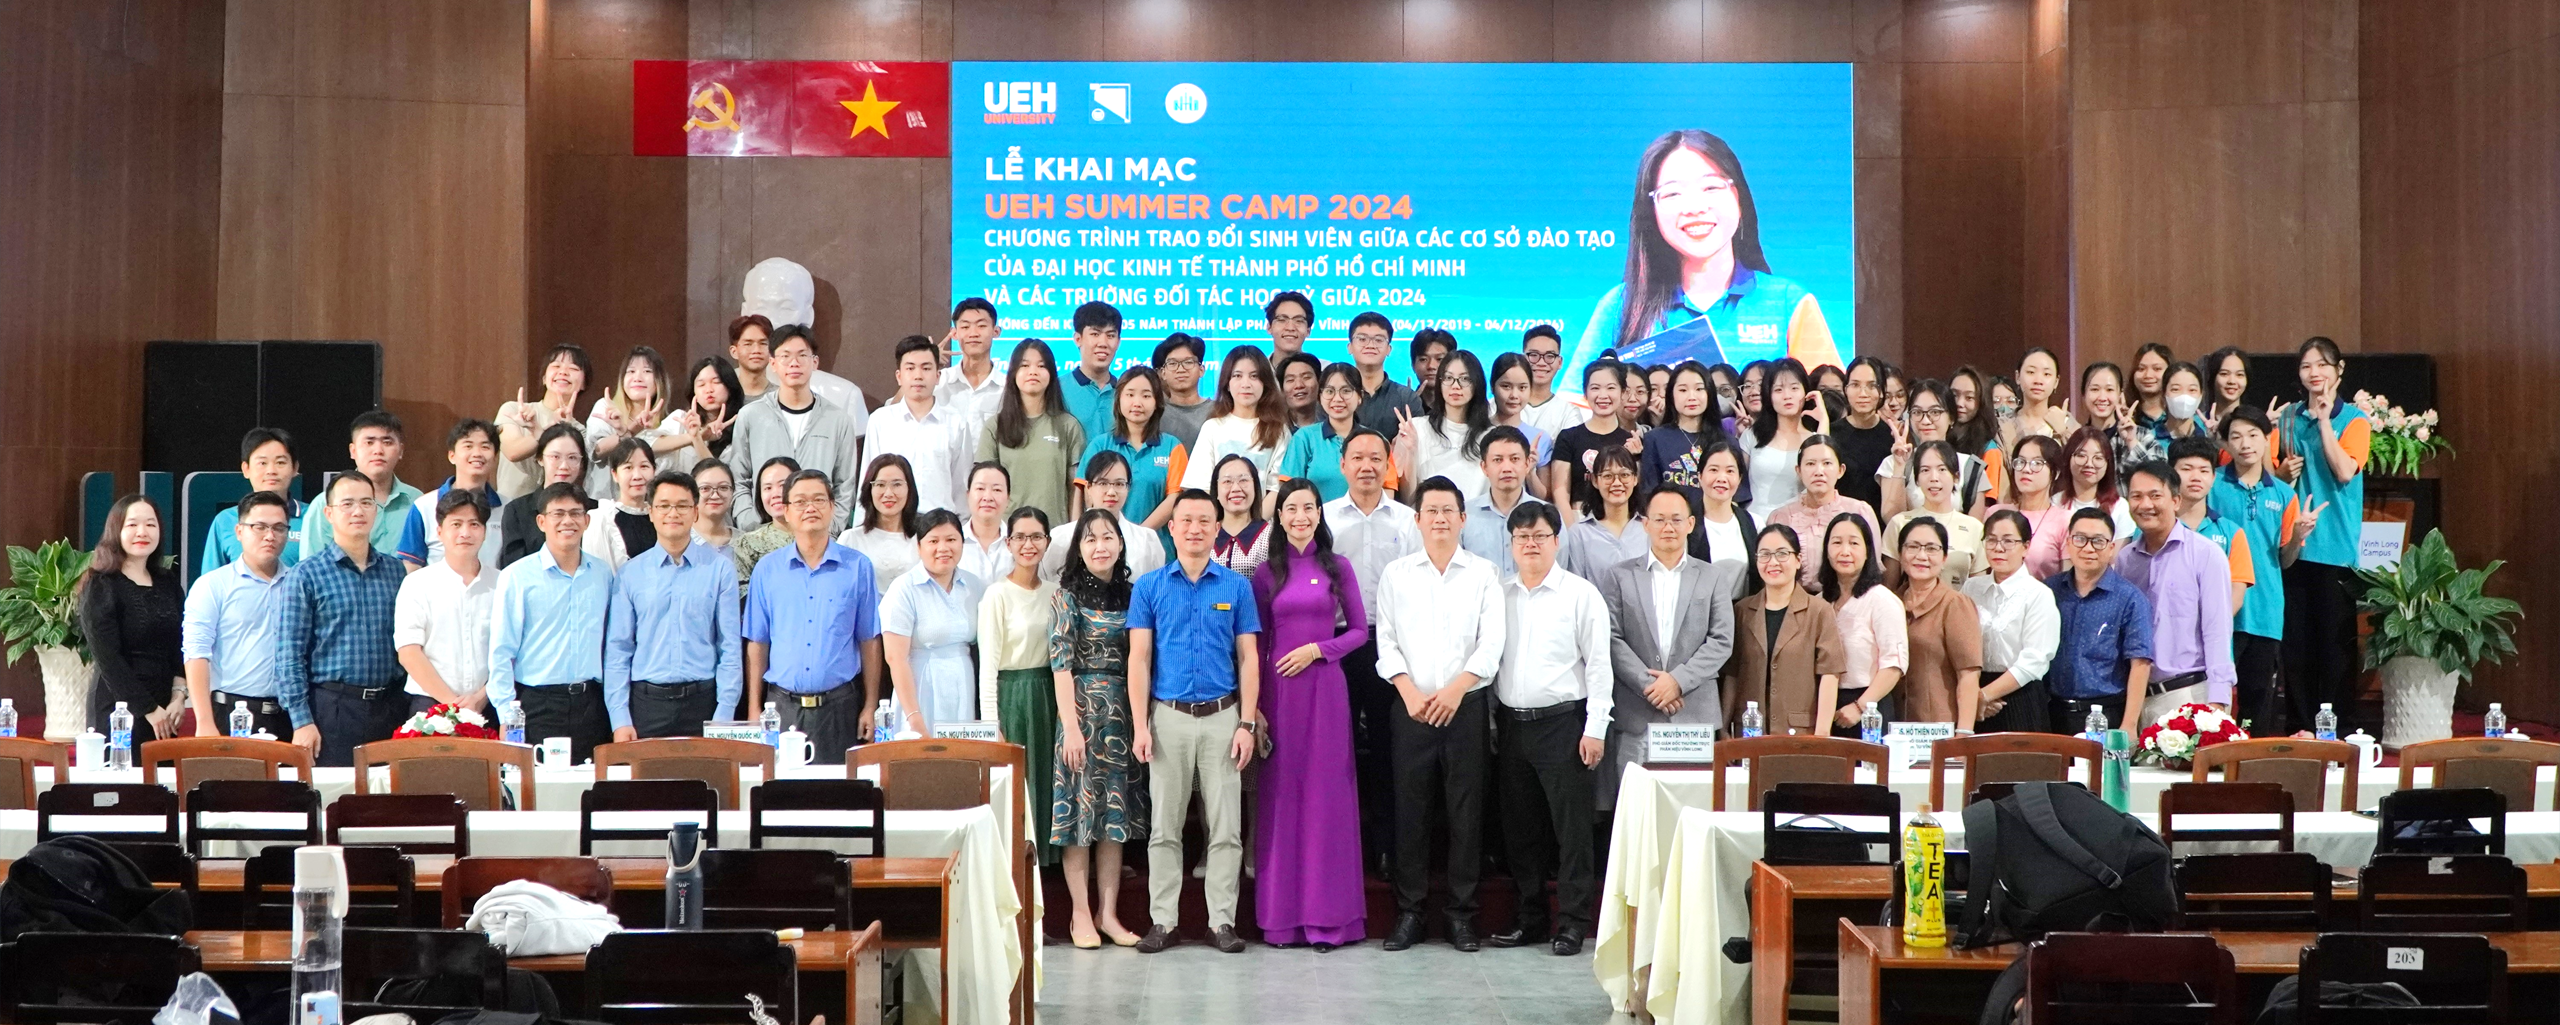 UEH SUMMER CAMP 2024: Student exchange program between campuses of  University of Economics Ho Chi Minh City and Partner Schools in Mid-semester 2024 at UEH Vinh Long Campus